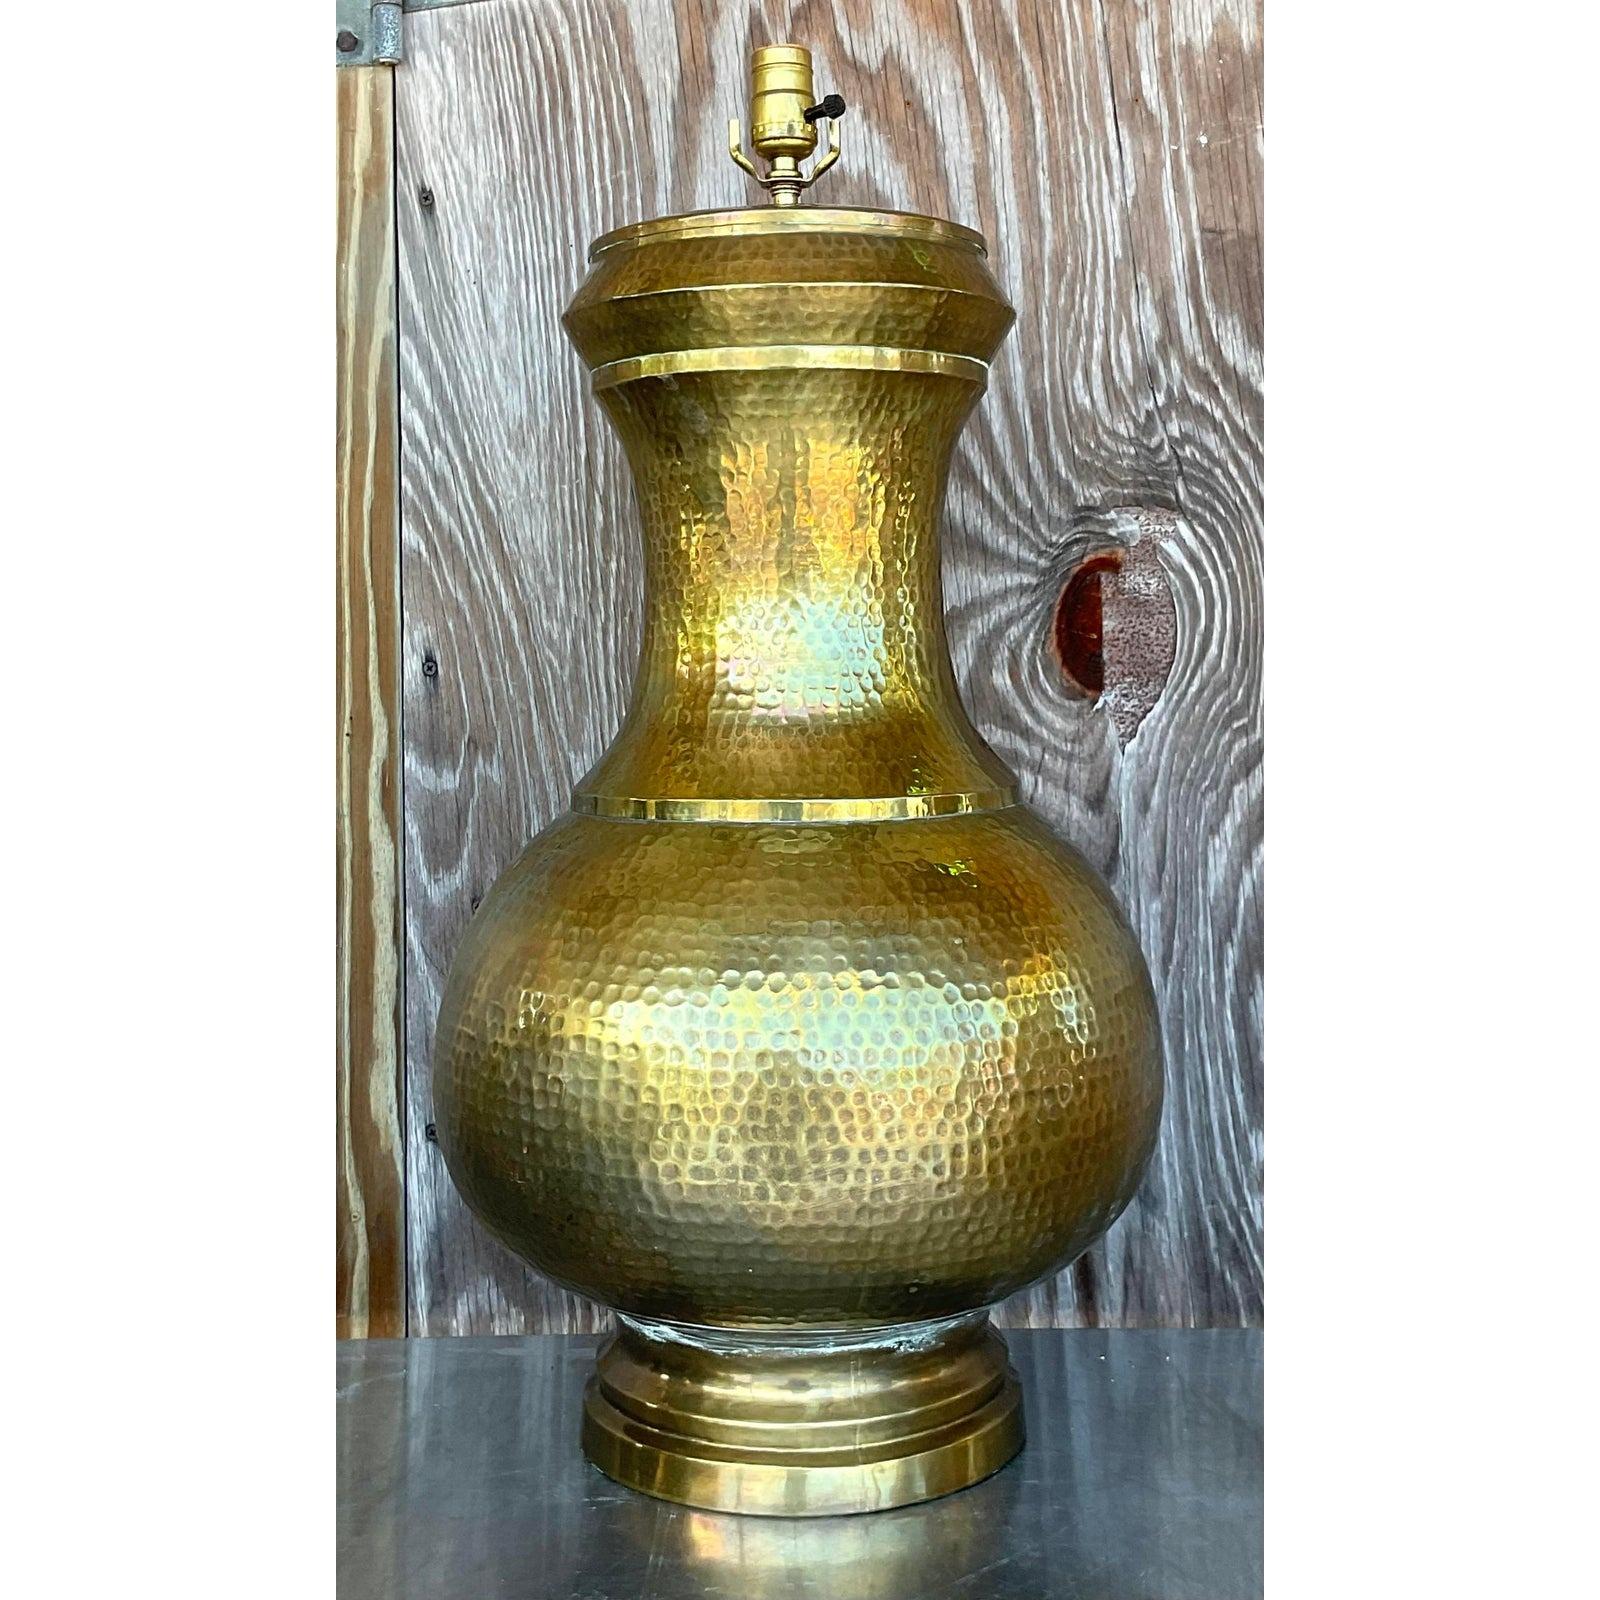 A spectacular vintage Boho table lamp. A chic hammered brass in a gourd shape. Monumental in size and drama. Acquired from a Palm Beach estate.